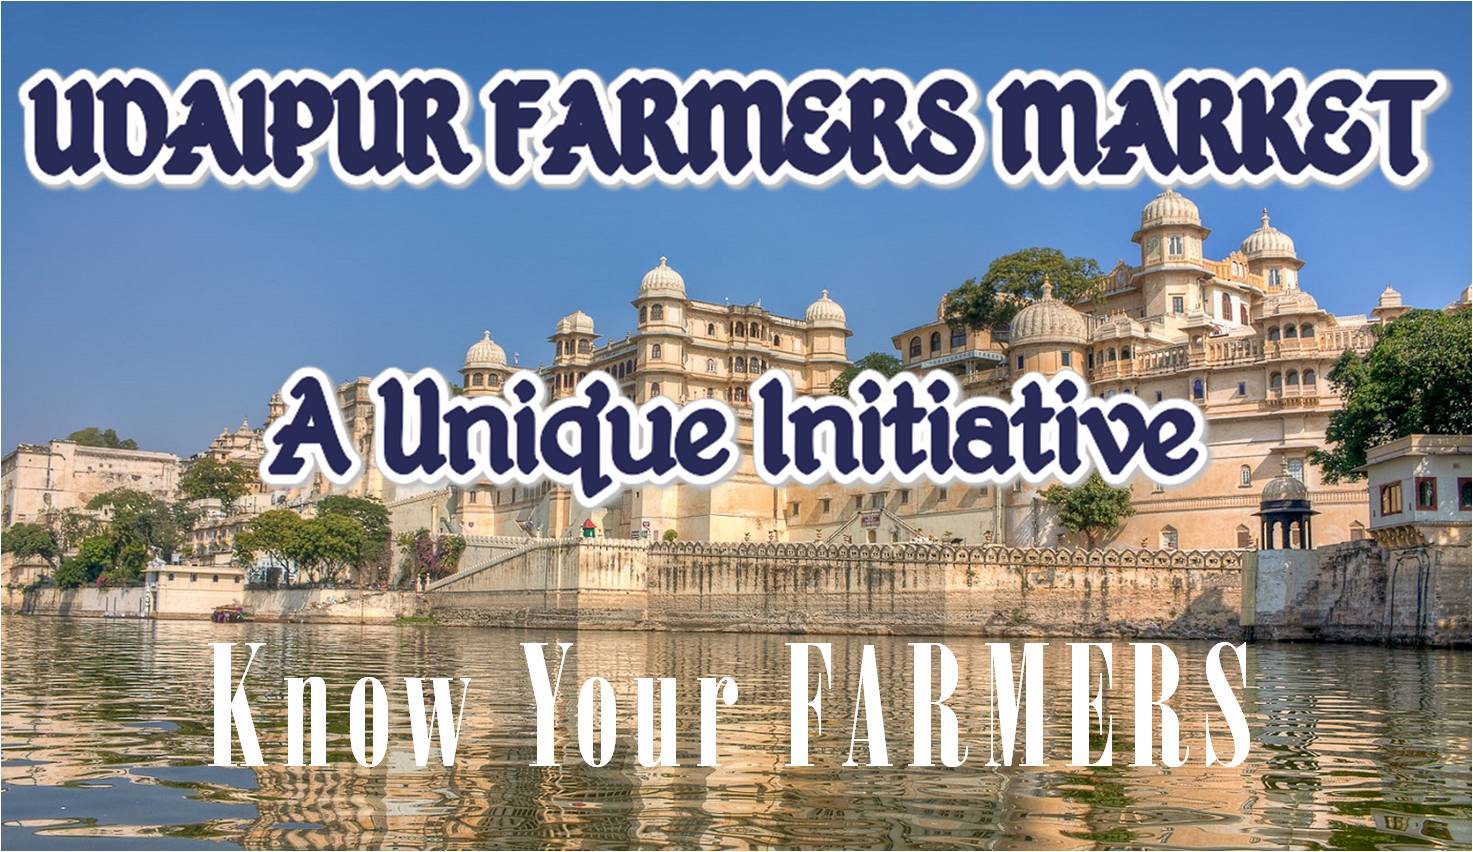 Udaipur Farmers Market brings local farmer produce directly to the consumer